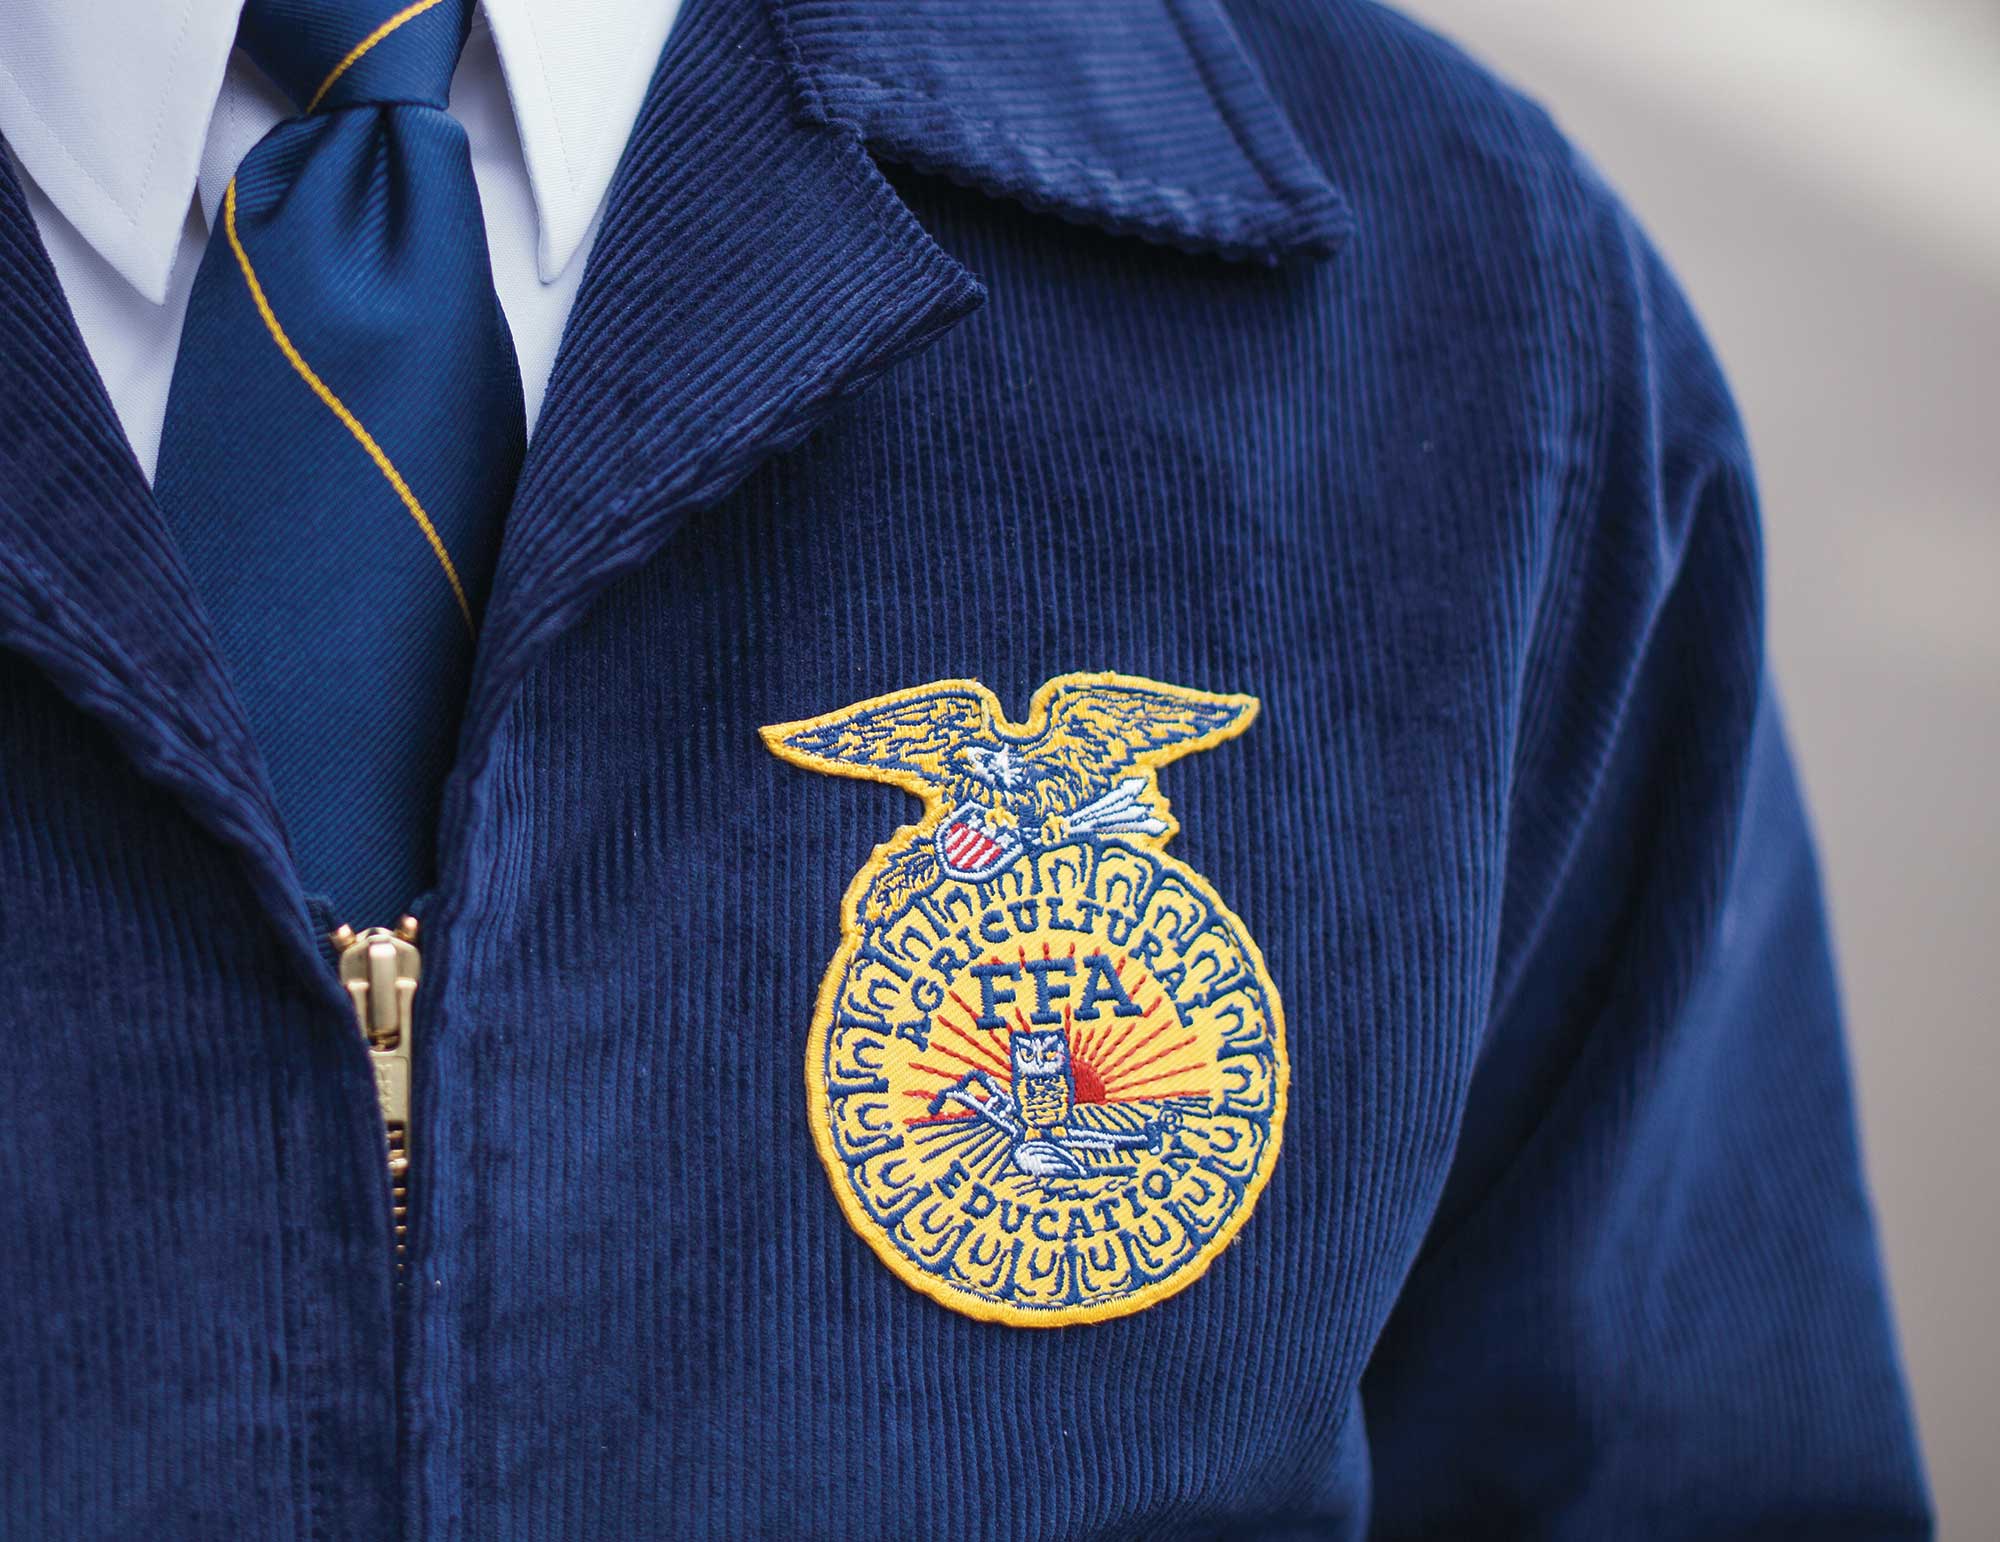 The history of the FFA creed | AGDAILY